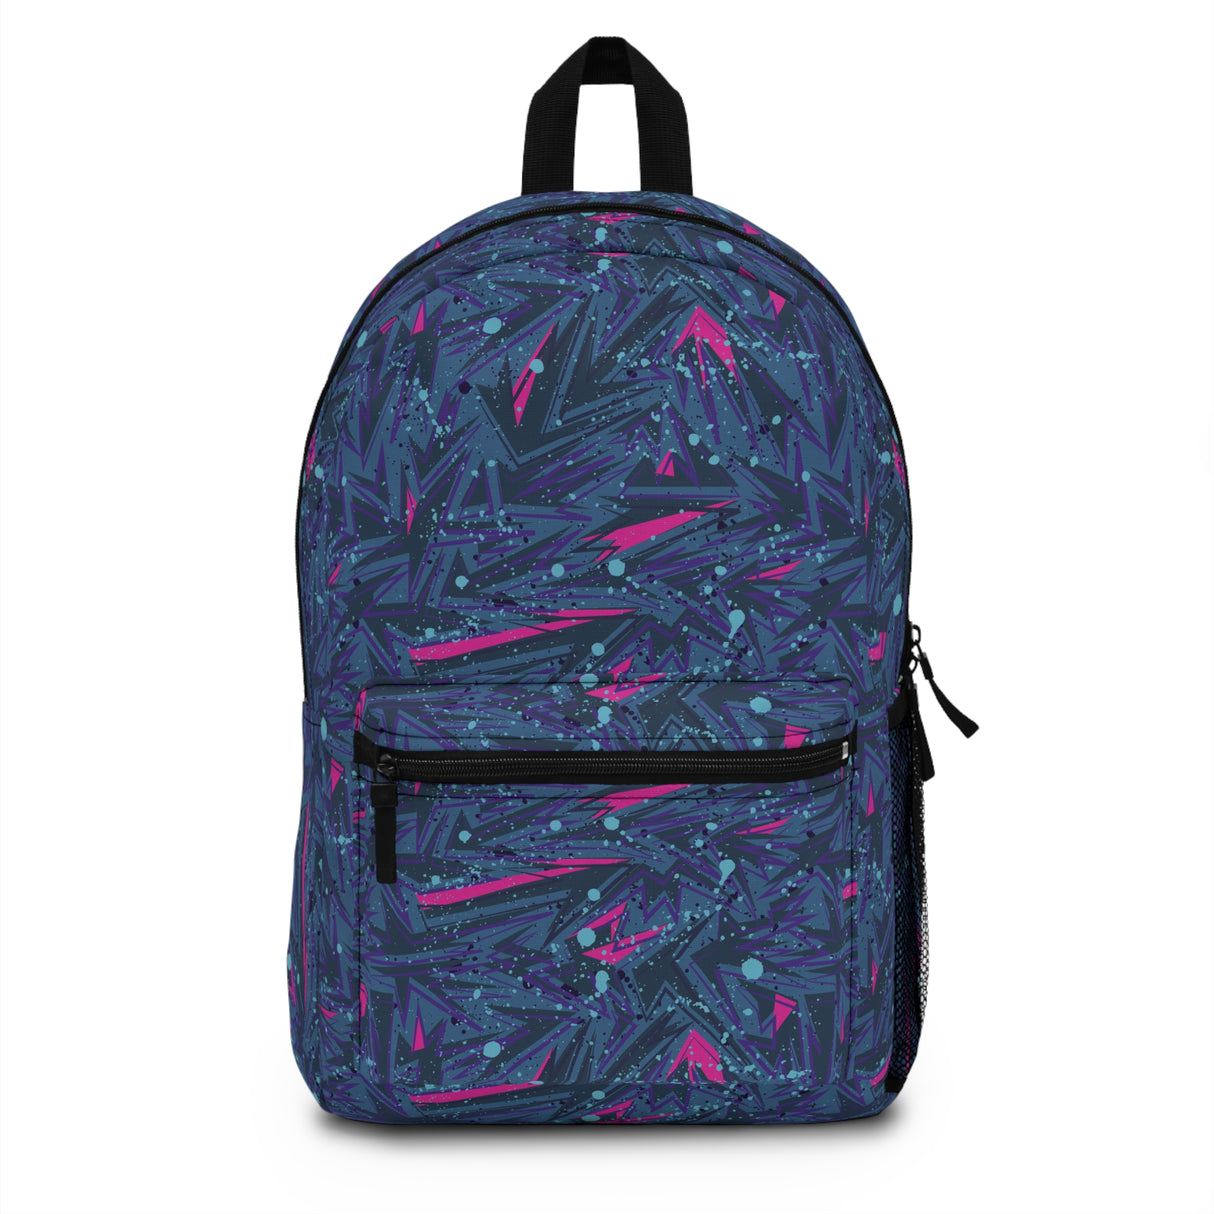 Kids Busy Shapes Backpack